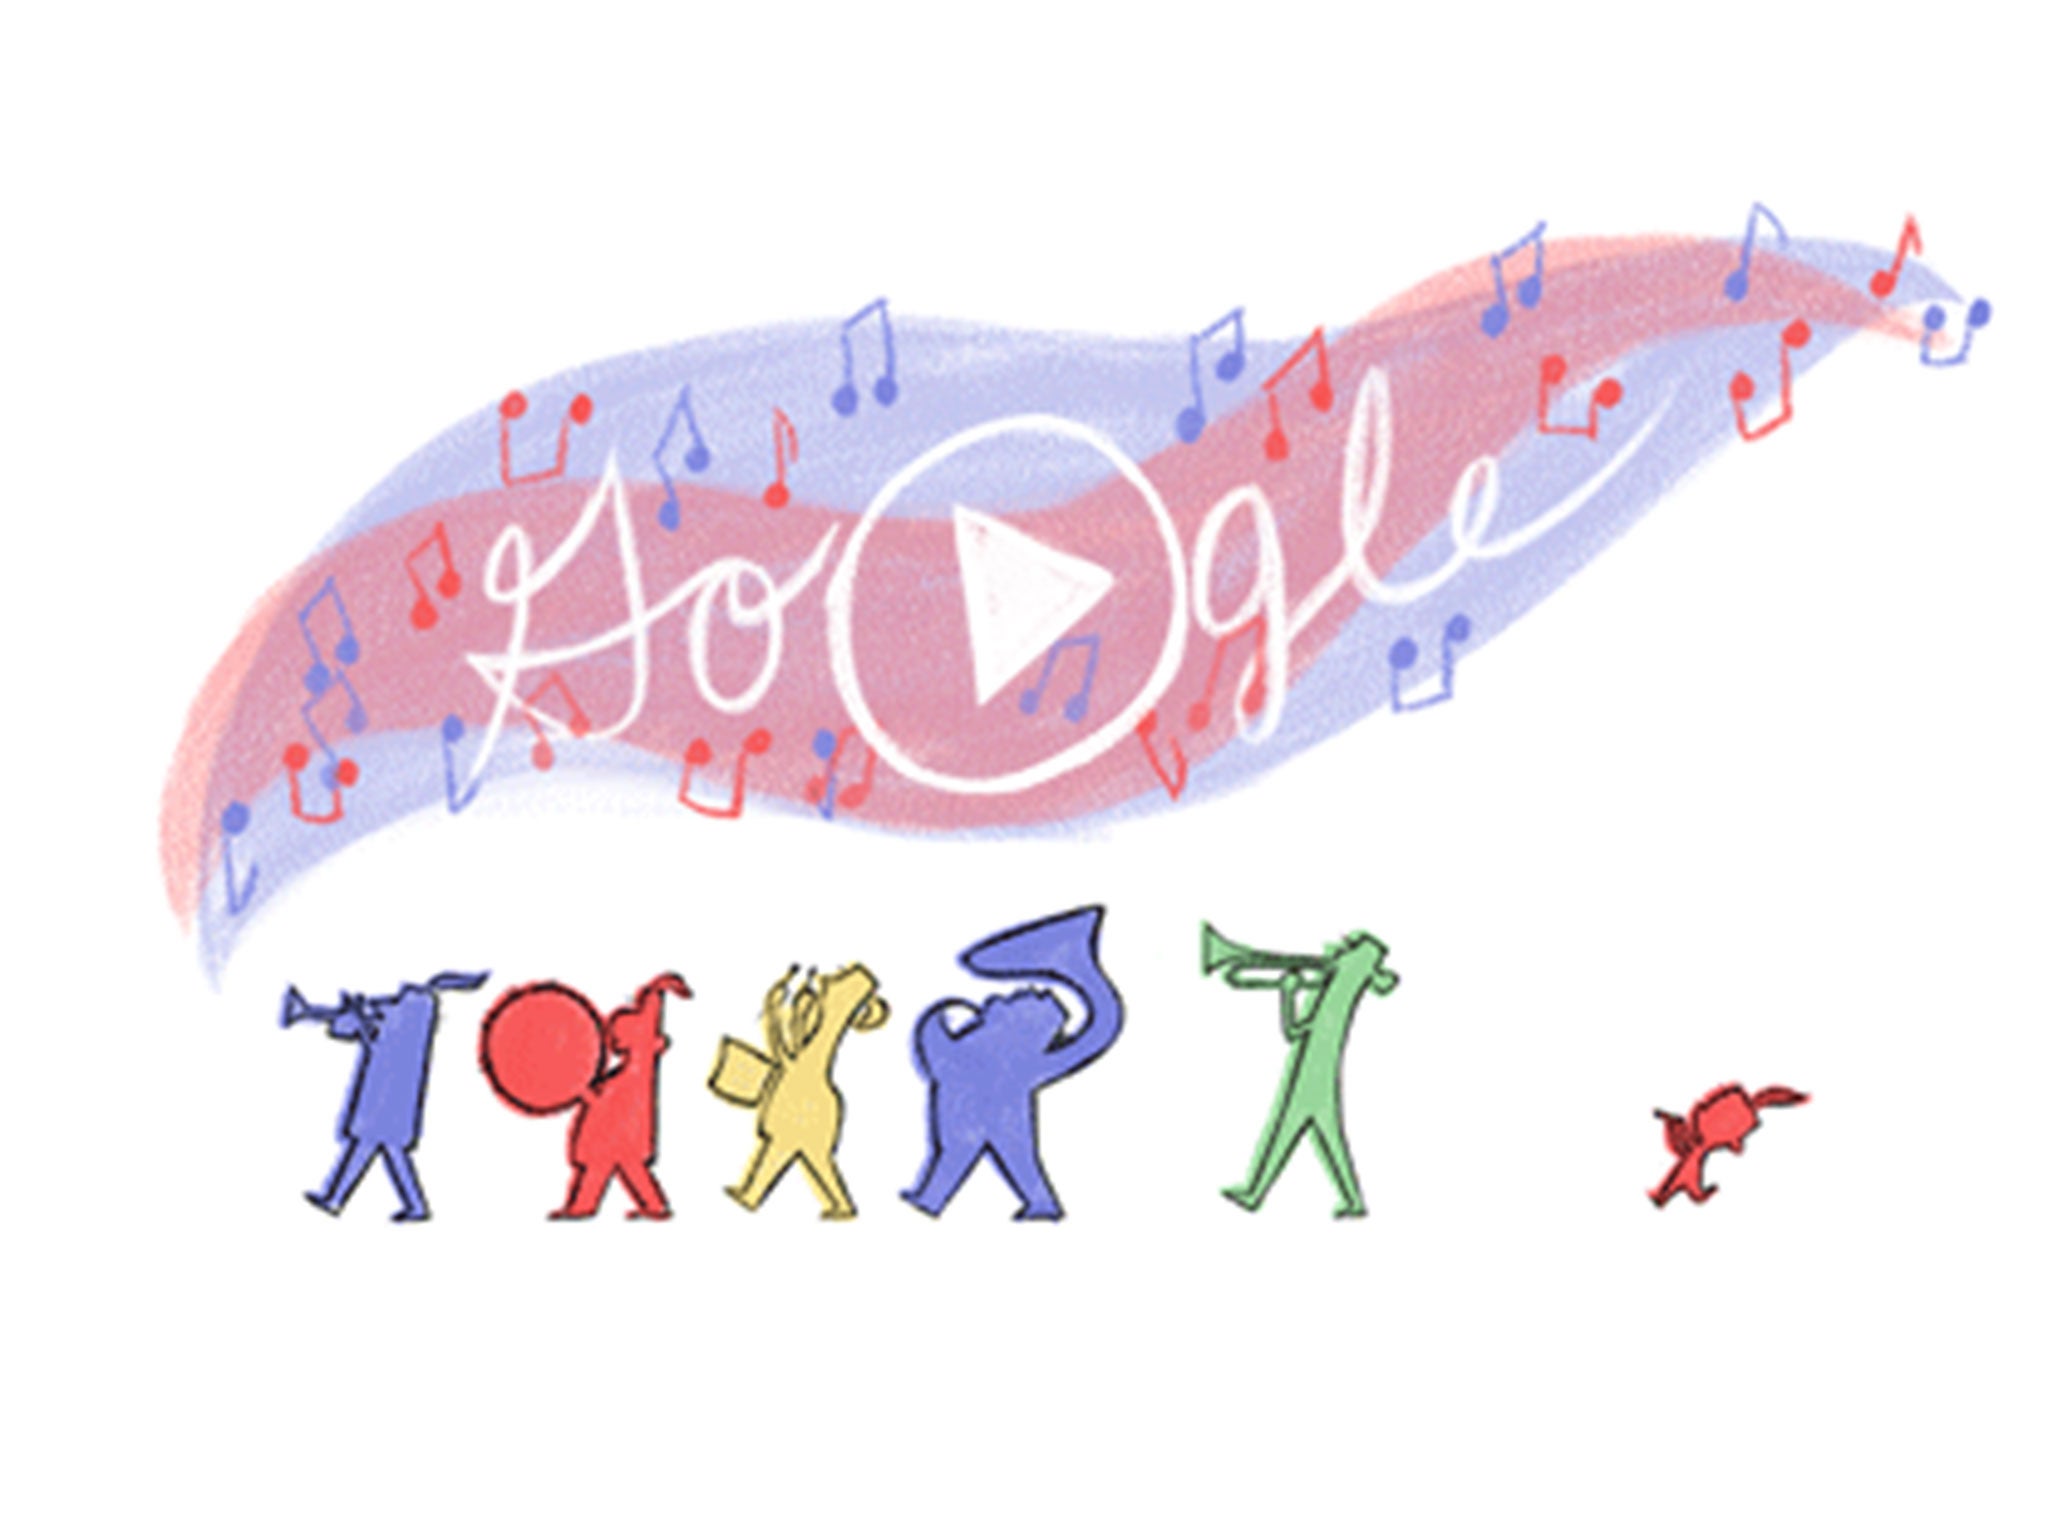 A United States Doodle launched on 4 July, 2014, to mark Independence Day